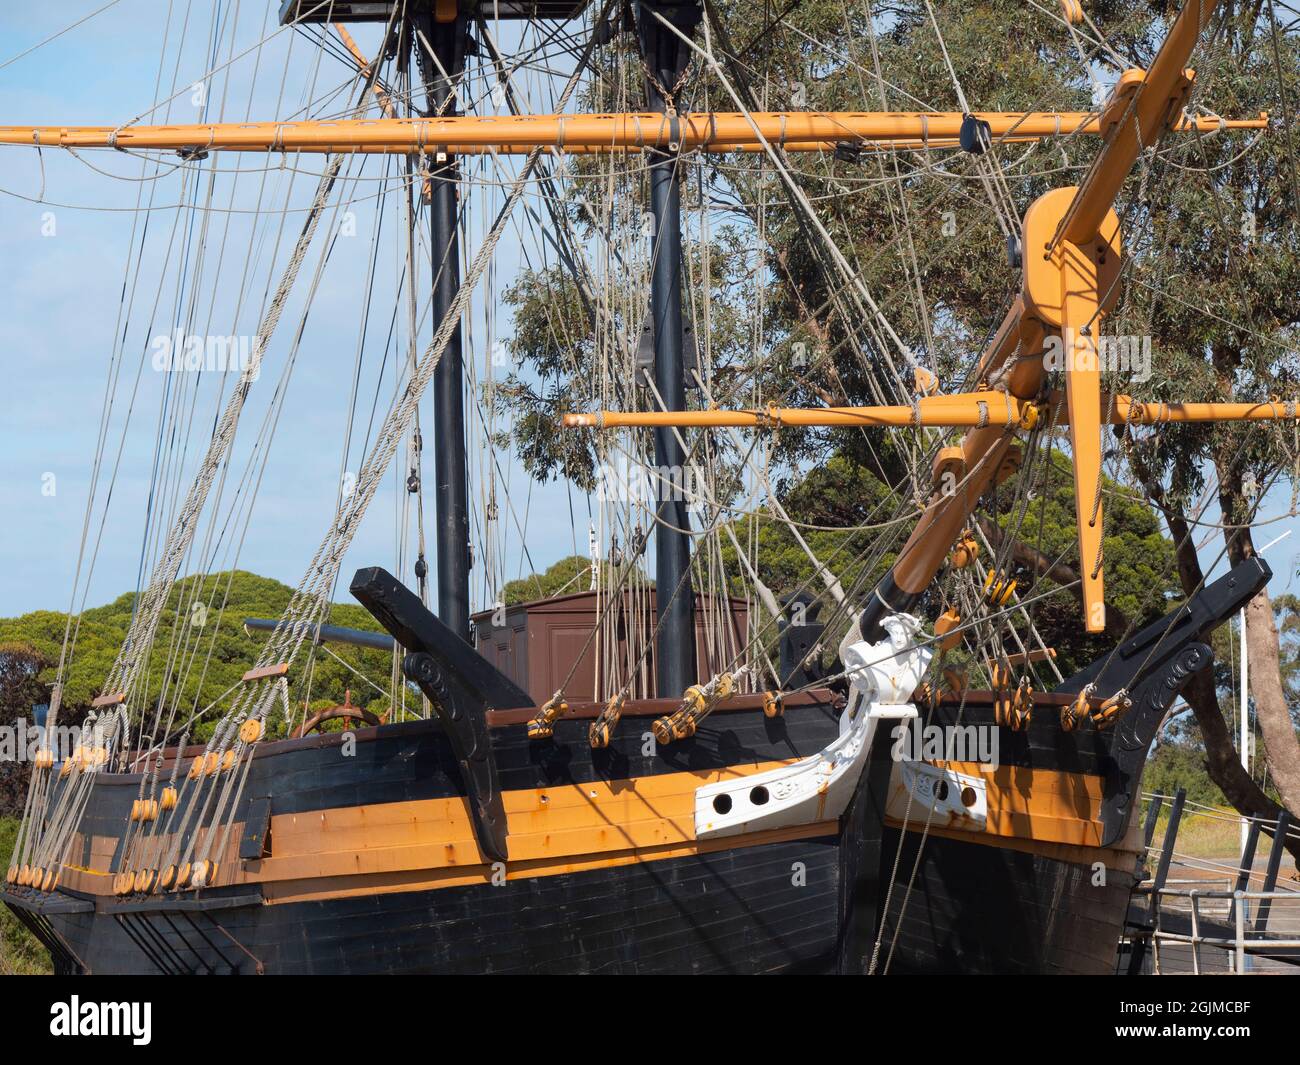 Brig Amity replica at Albany Western Australia.   The Amity was used to establish the first settlements in what would later become Queensland and West Stock Photo